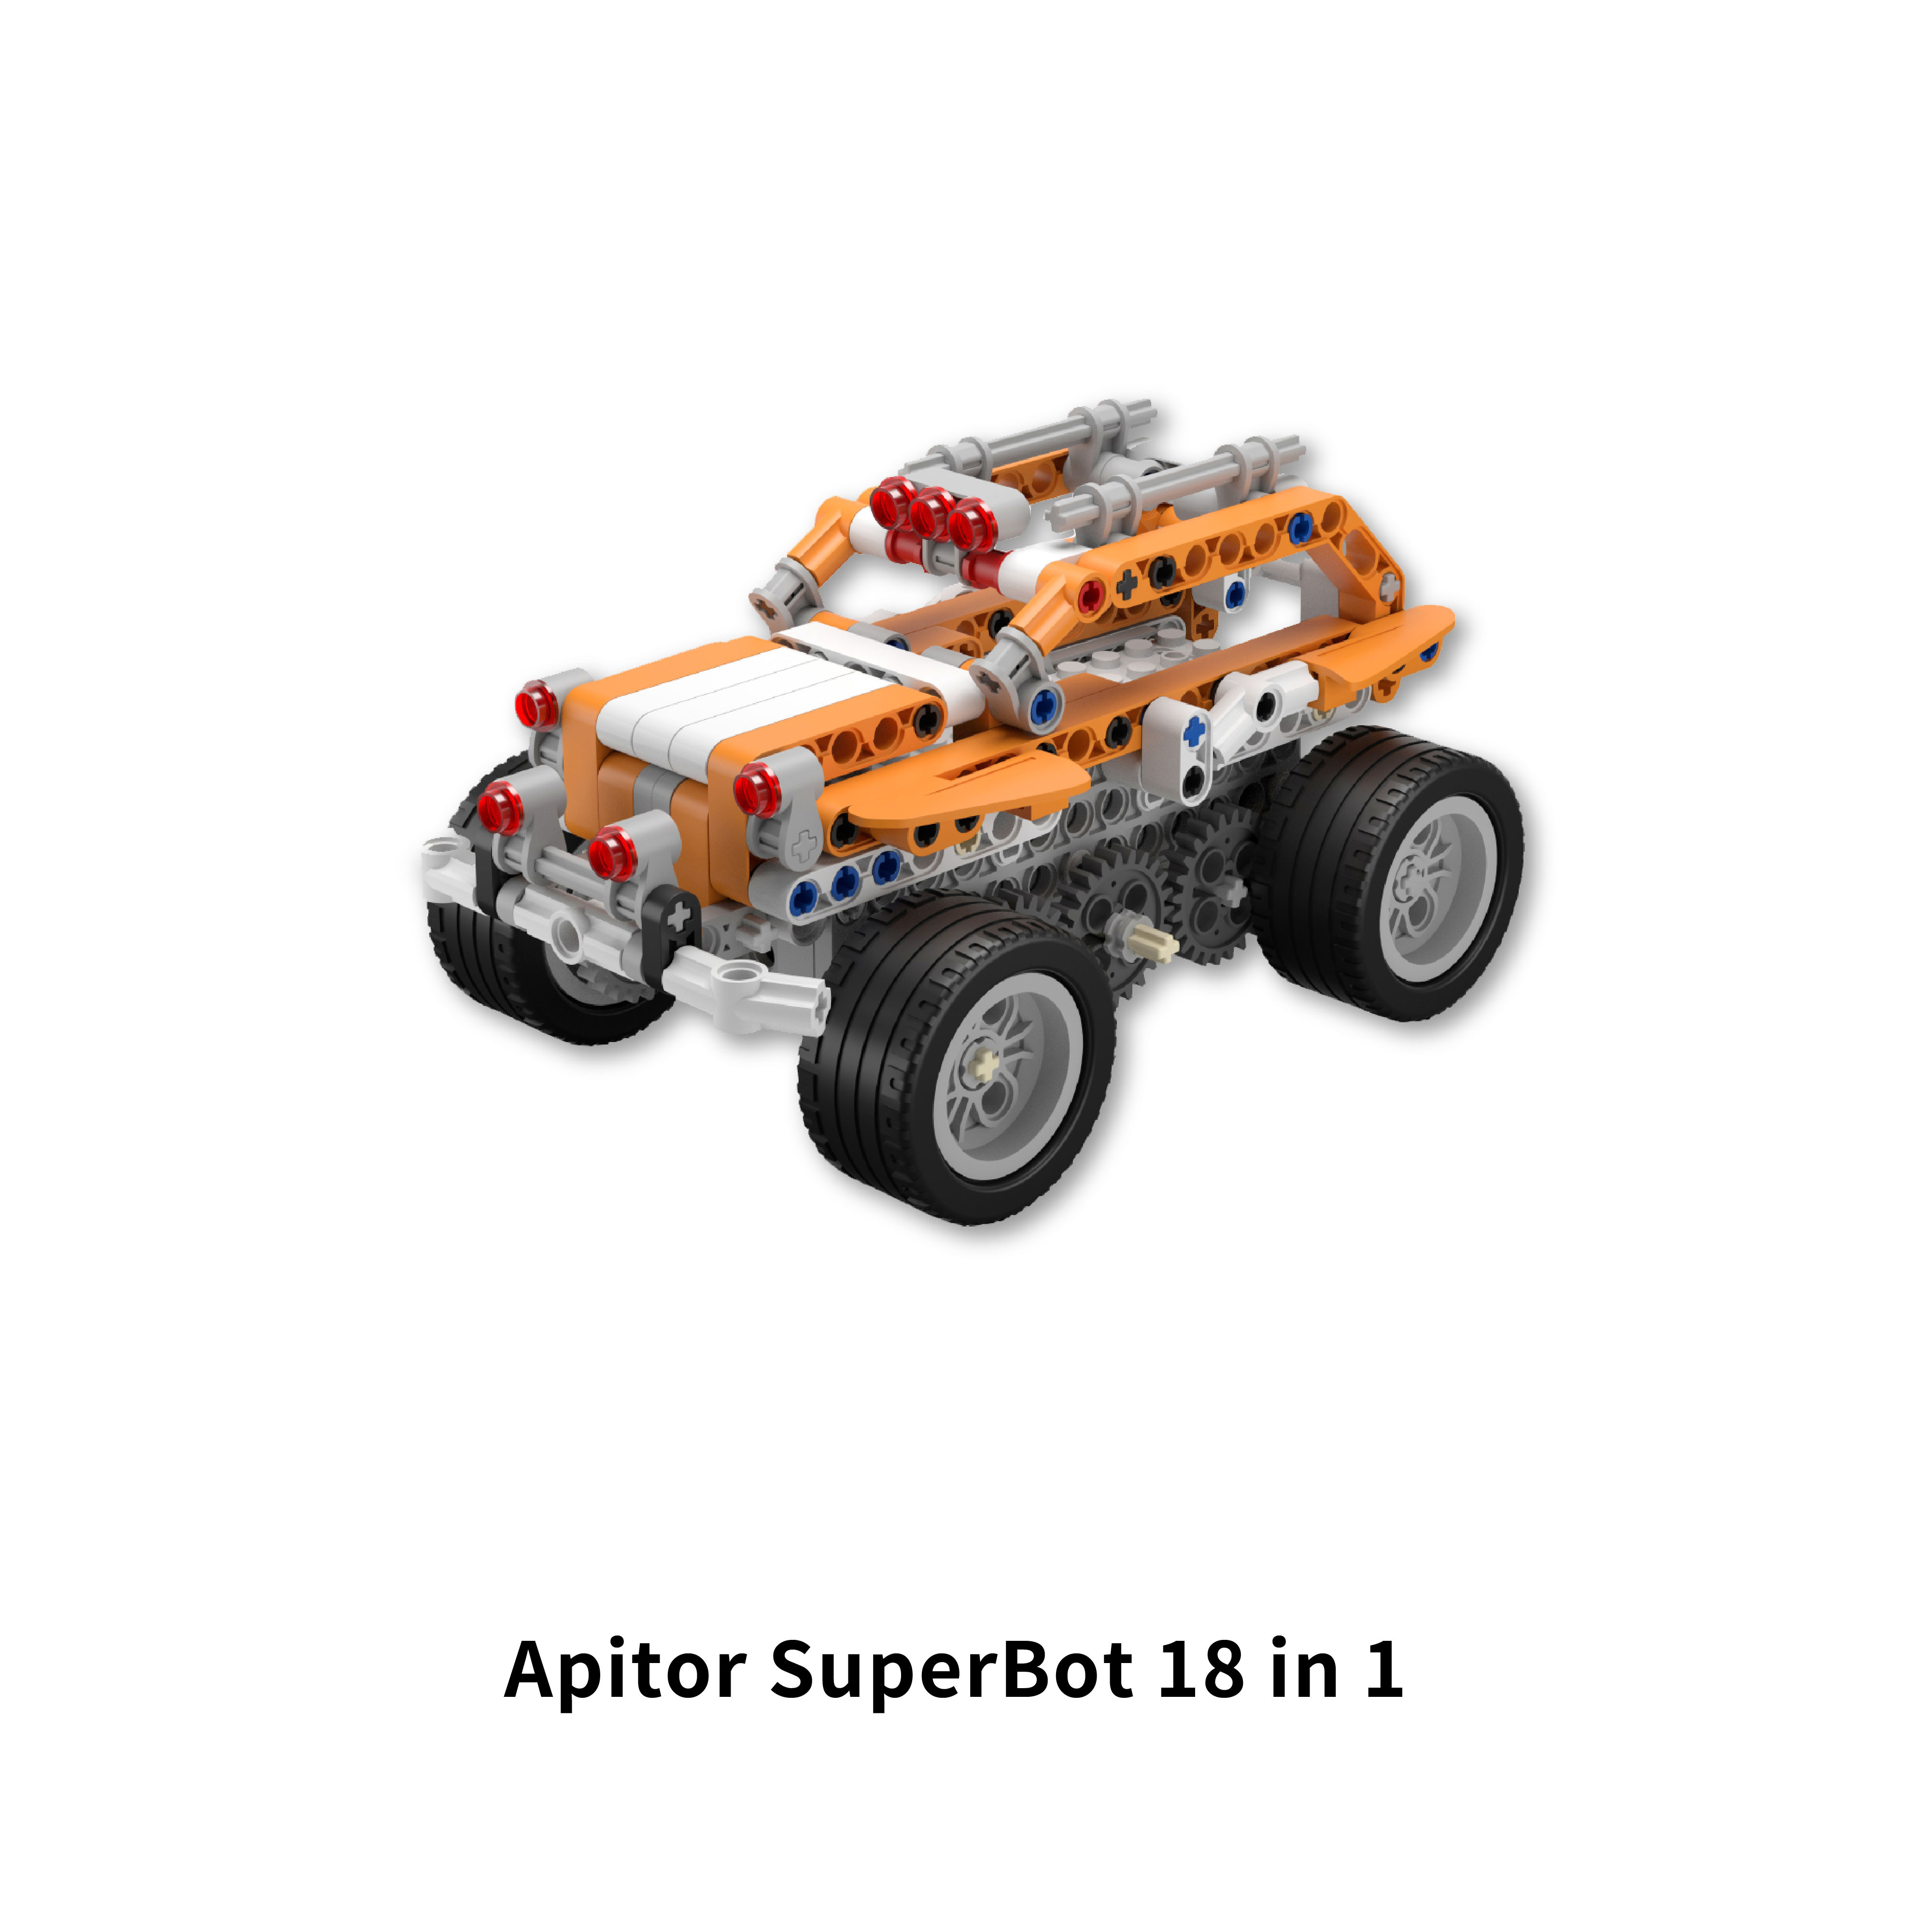 Apitor SuperBot 18 in 1 